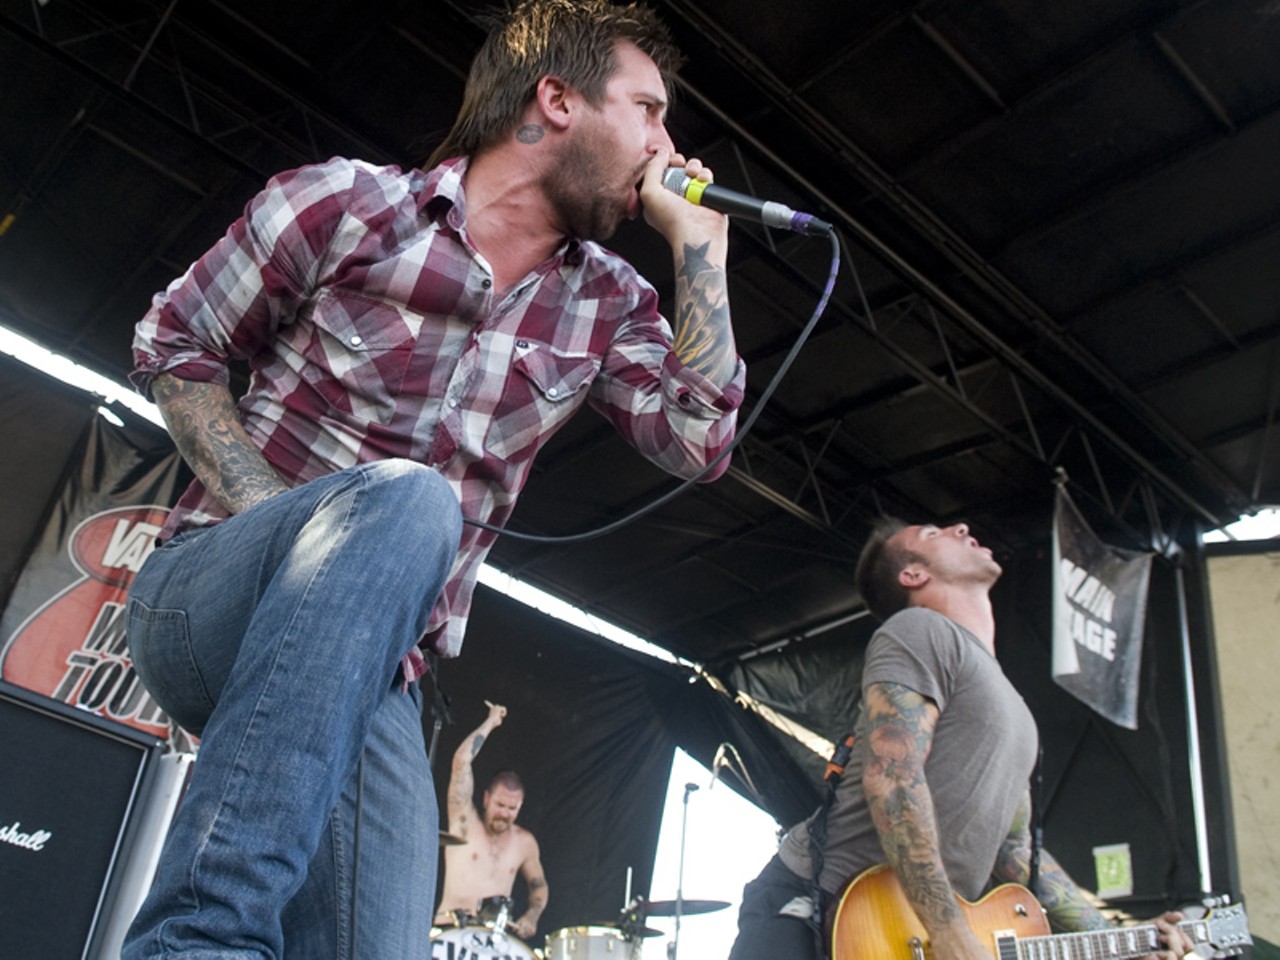 Every Time I Die performing at the 2010 Vans Warped Tour in St. Louis.